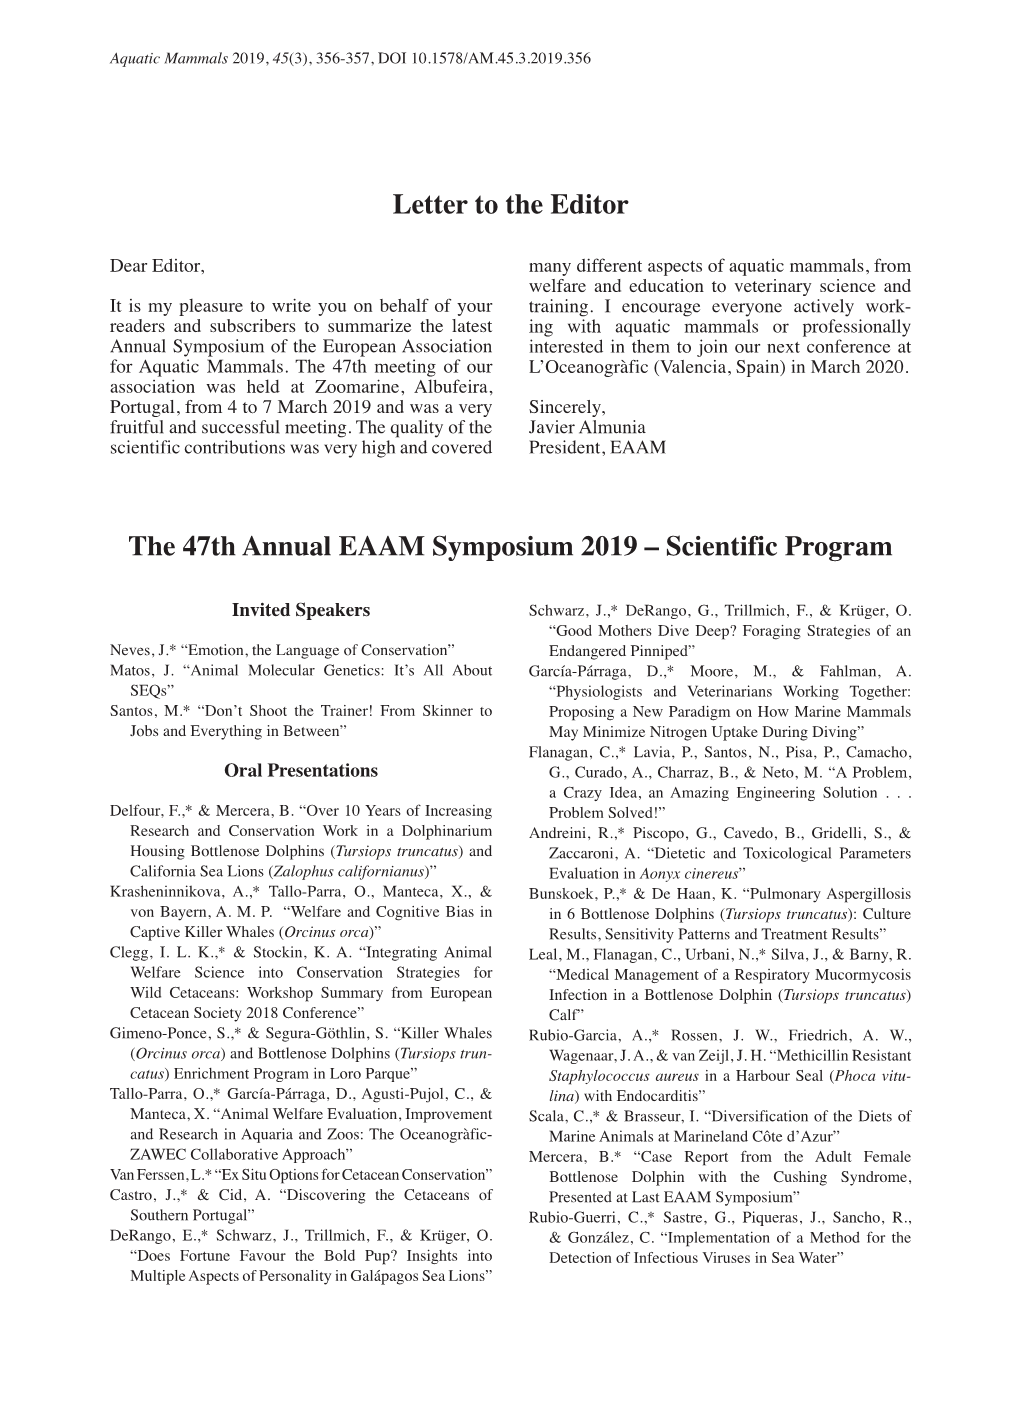 Letter to the Editor the 47Th Annual EAAM Symposium 2019